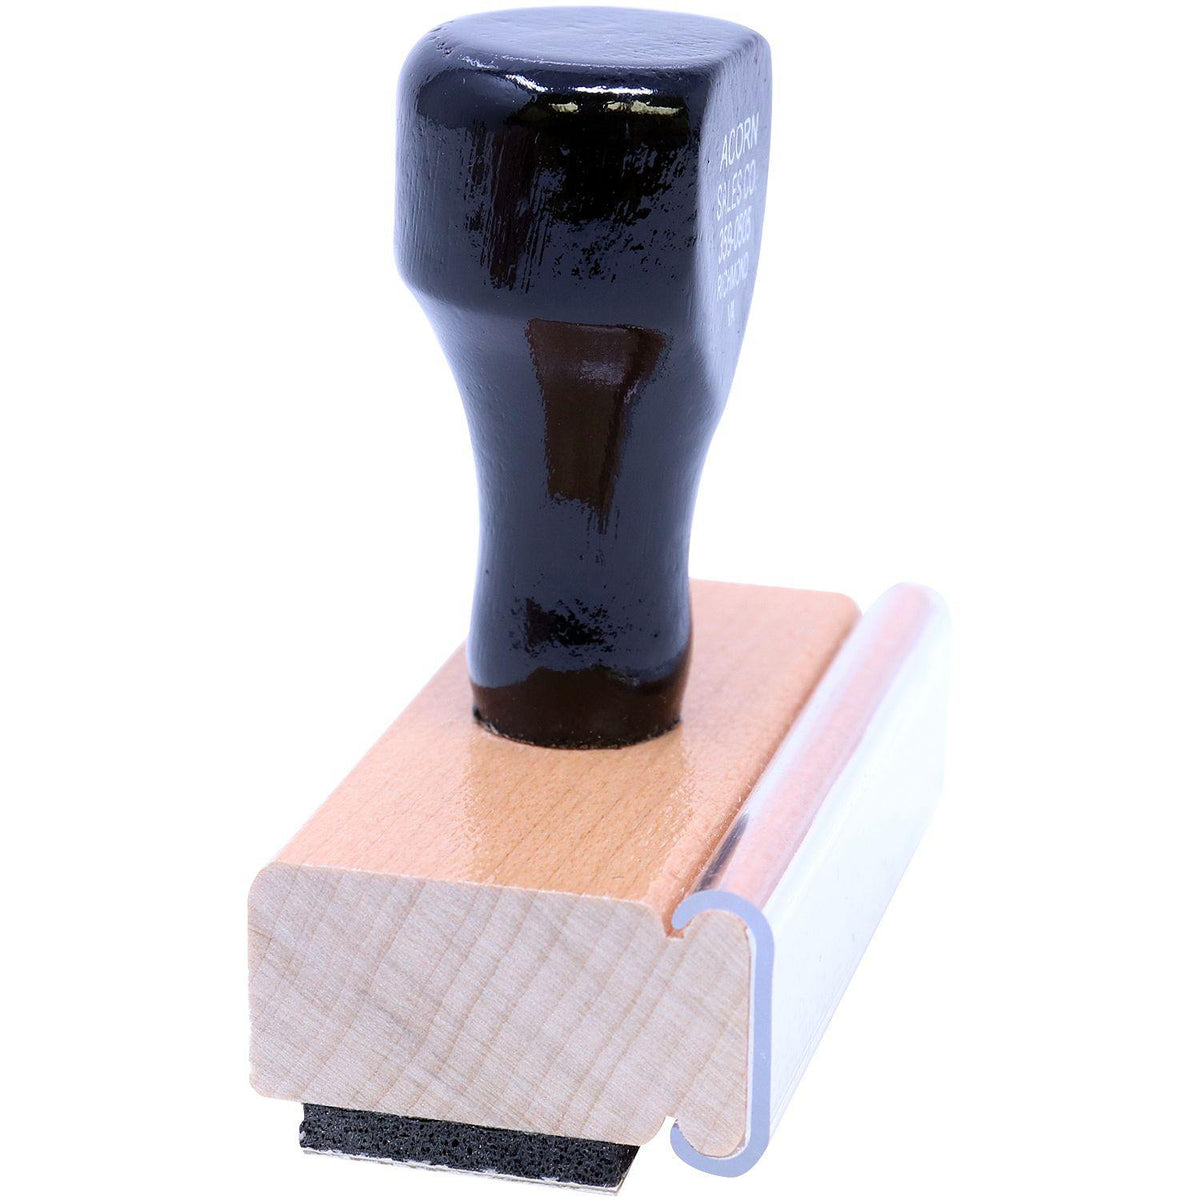 Medical Provider Smoker Rubber Stamp - Engineer Seal Stamps - Brand_Acorn, Impression Size_Small, Stamp Type_Regular Stamp, Type of Use_Medical Office